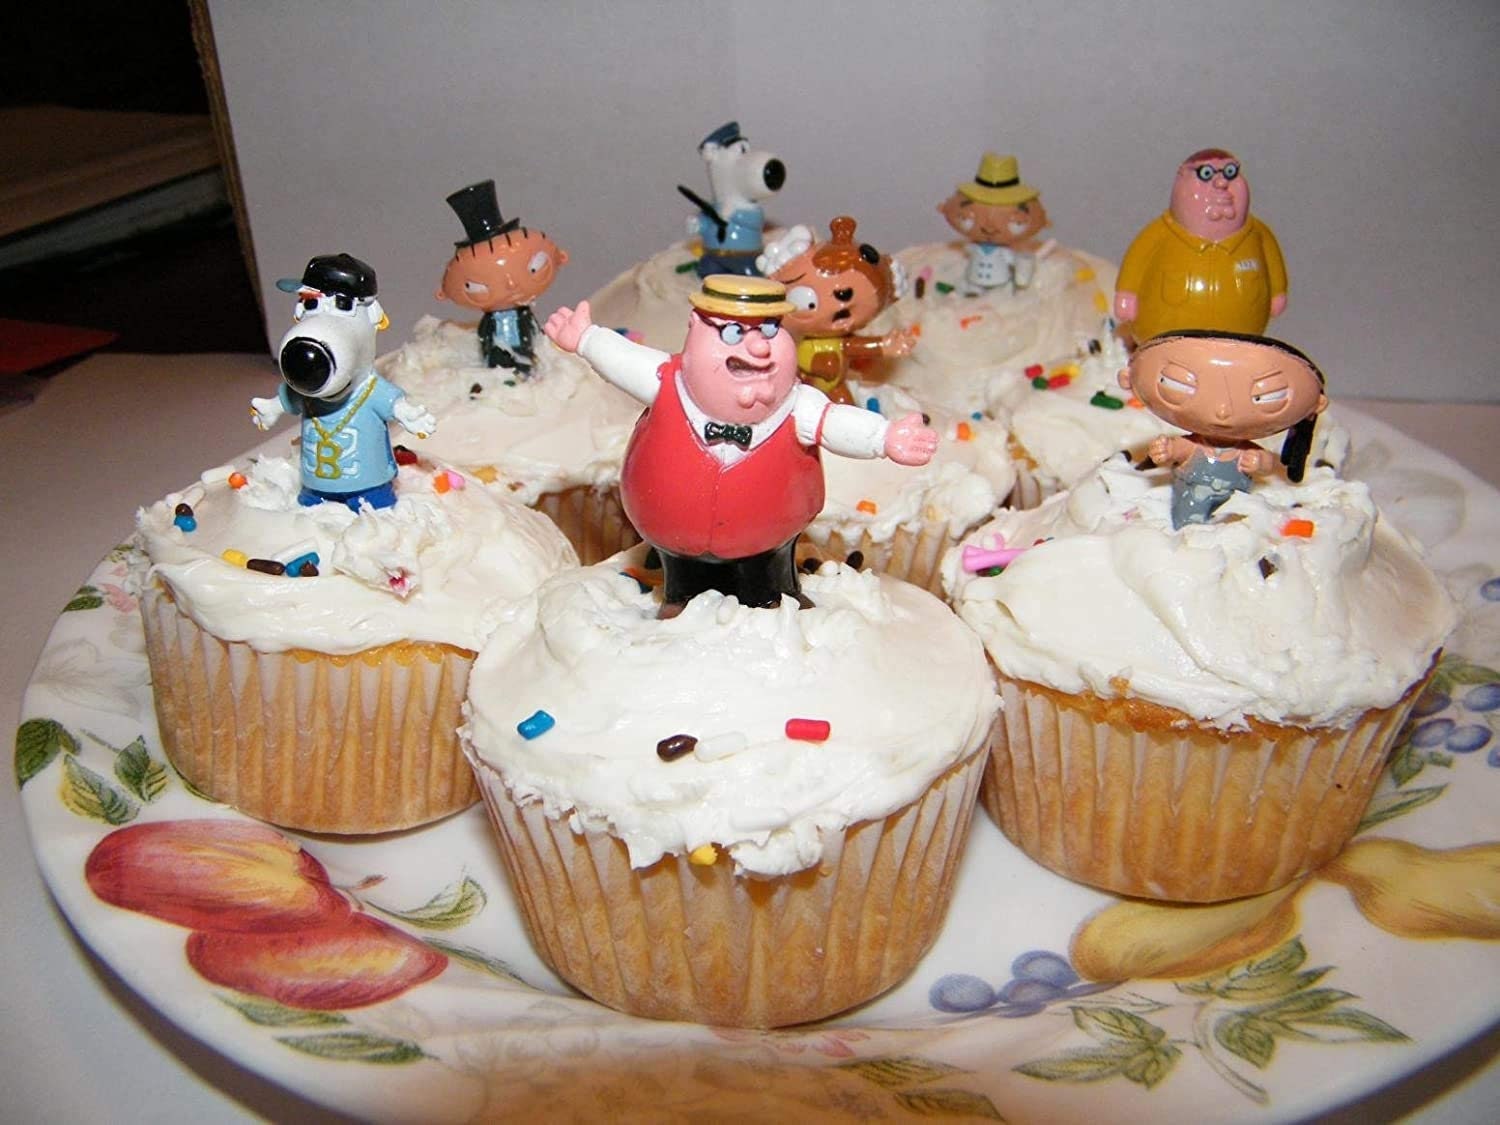 Family Guy Cake Toppers/cake Decorations Set of 8 With Peter - Etsy